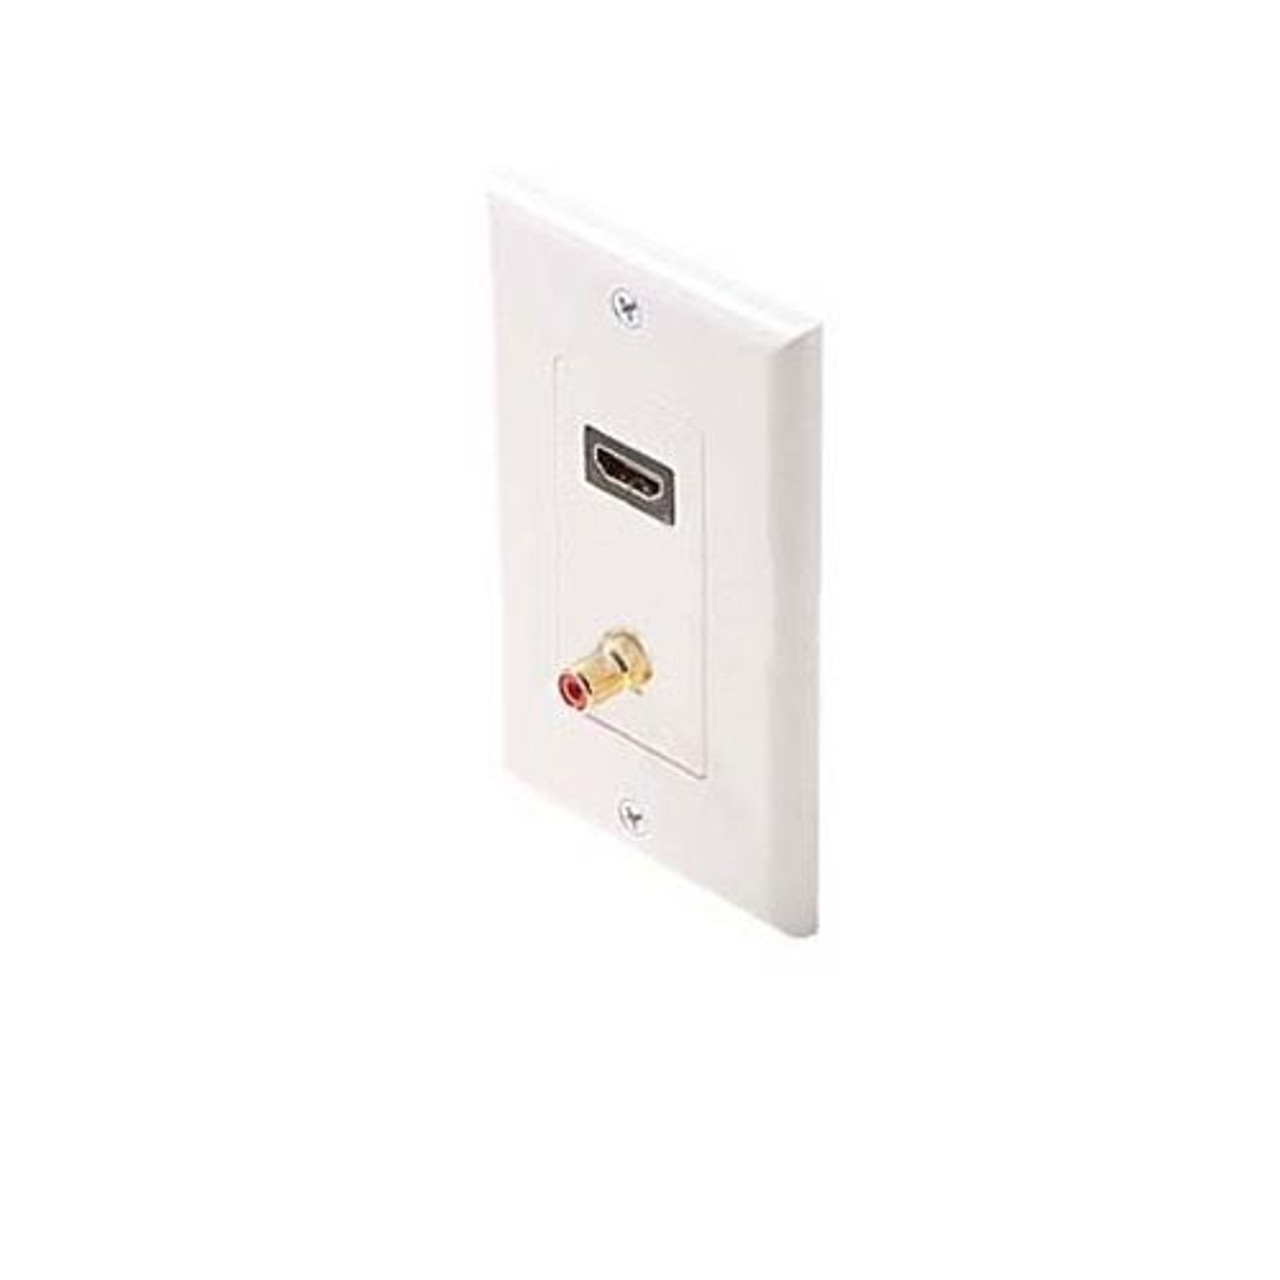 Eagle HDMI Wall Plate RCA Jack Single Red Band Female Feed Thru Faceplate White Decorator Style RCA Mono Audio F Gold Connector White Plate HDMI Female to HDMI Female, High Definition Multi-Media Interface HDTV Applications